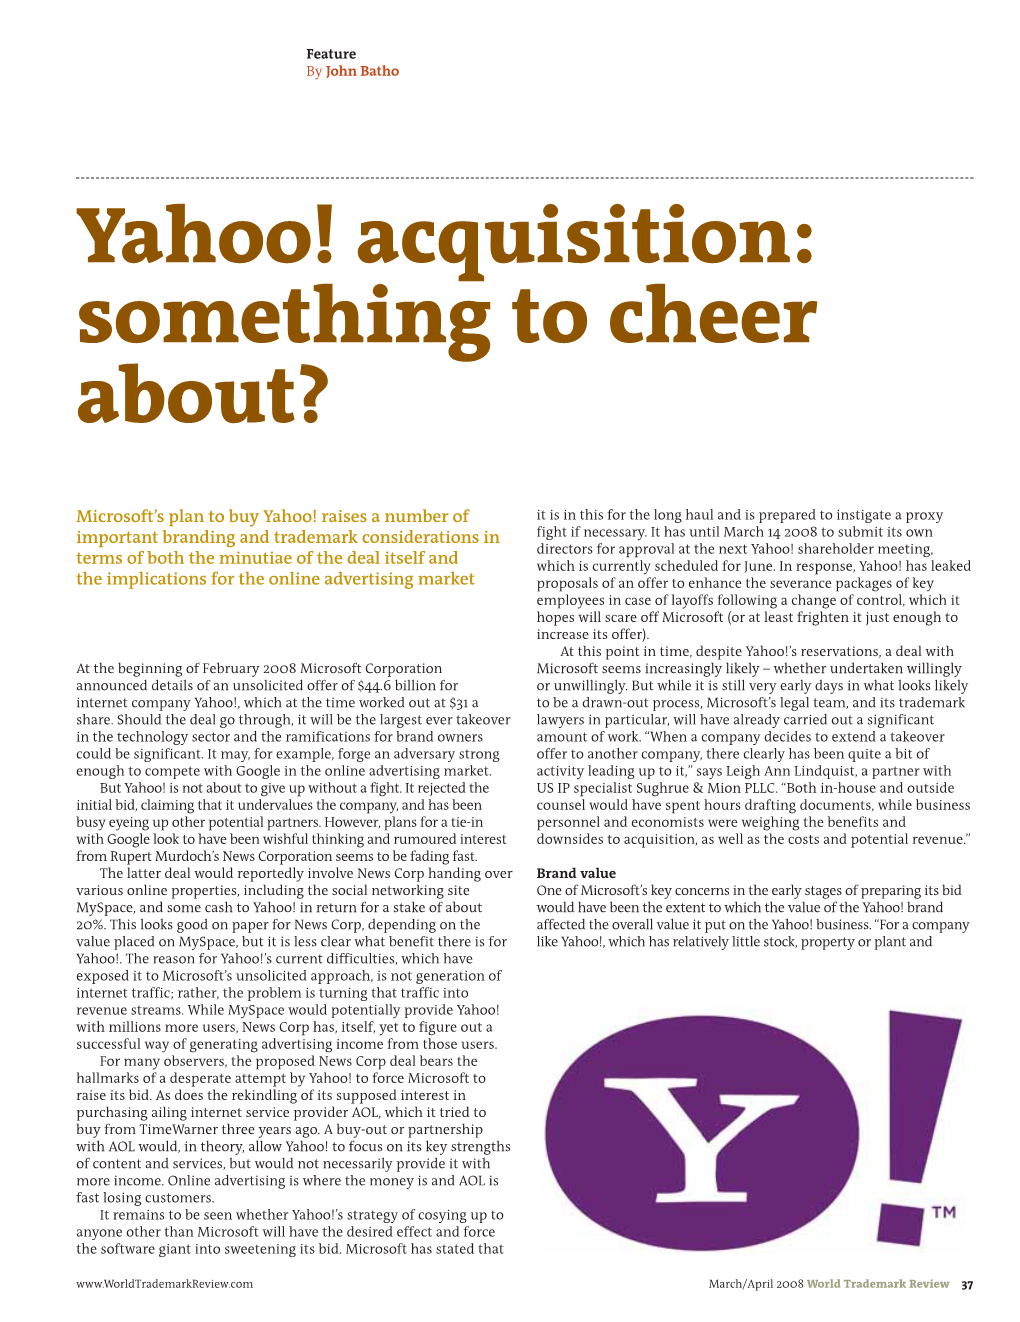 Yahoo! Acquisition: Something to Cheer About?